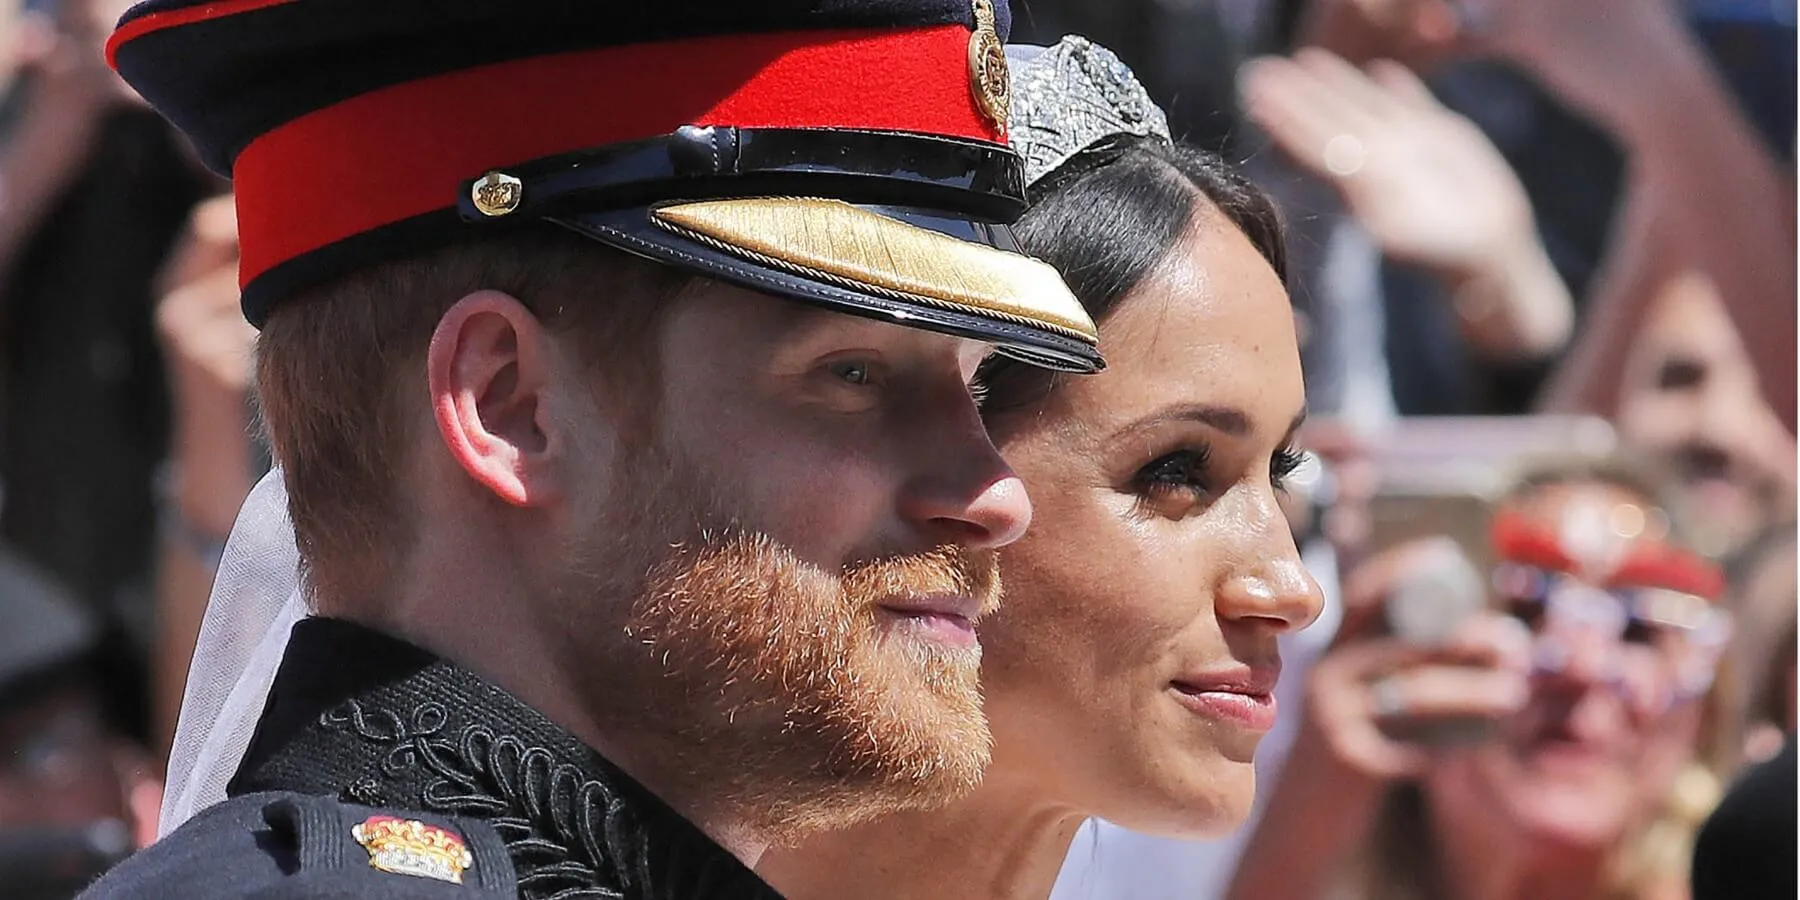 Prince Harry and Meghan Markle married in May 2018 becoming the Duke and Duchess of Sussex.